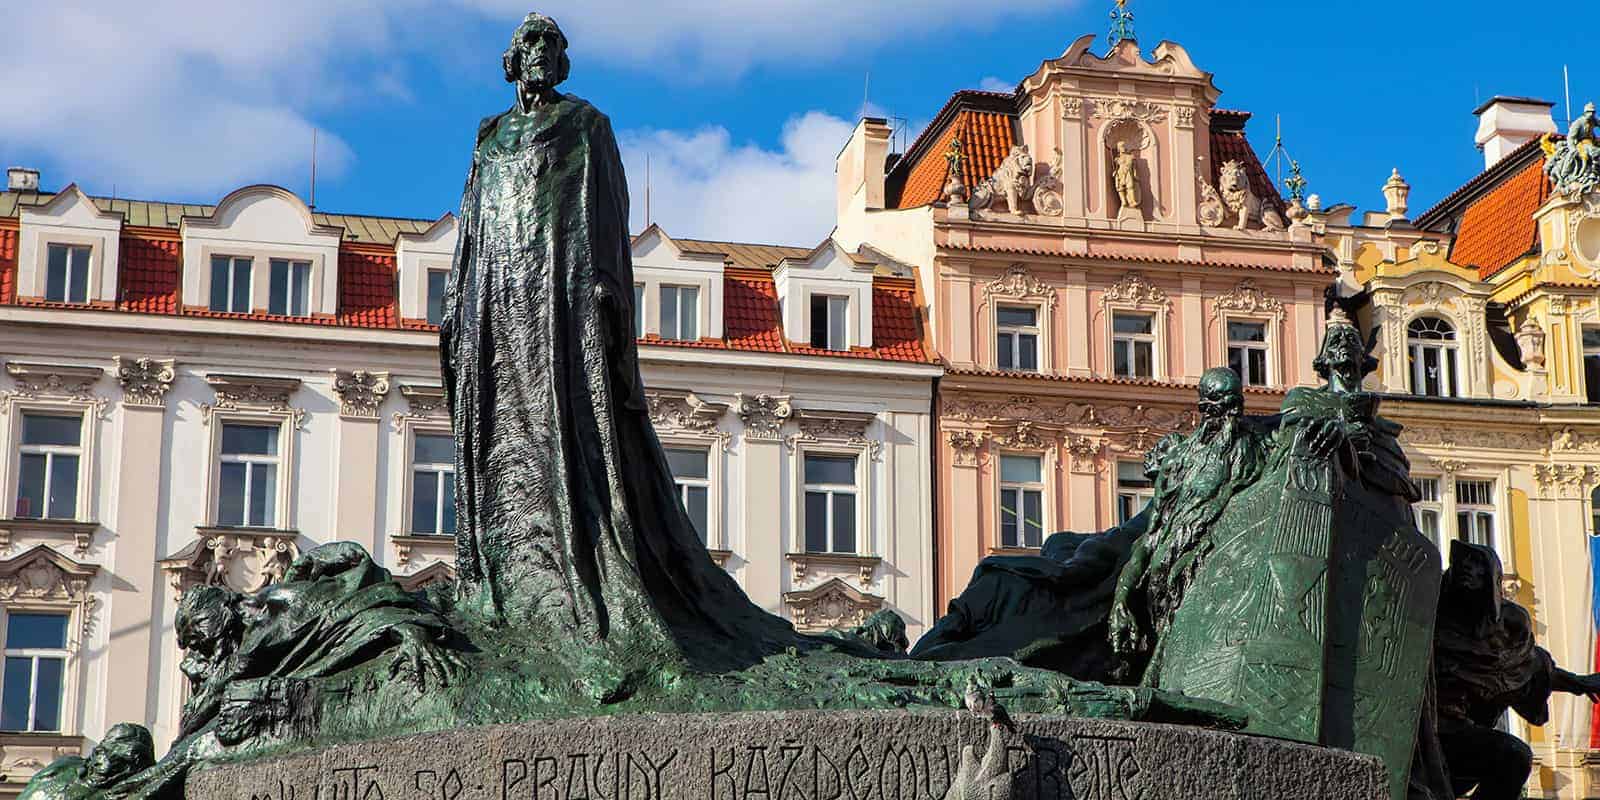 A picture of the Jan Hus Memorial statue in Prague, Czech Republic. This statue is located in the Old Town Square in Prague.